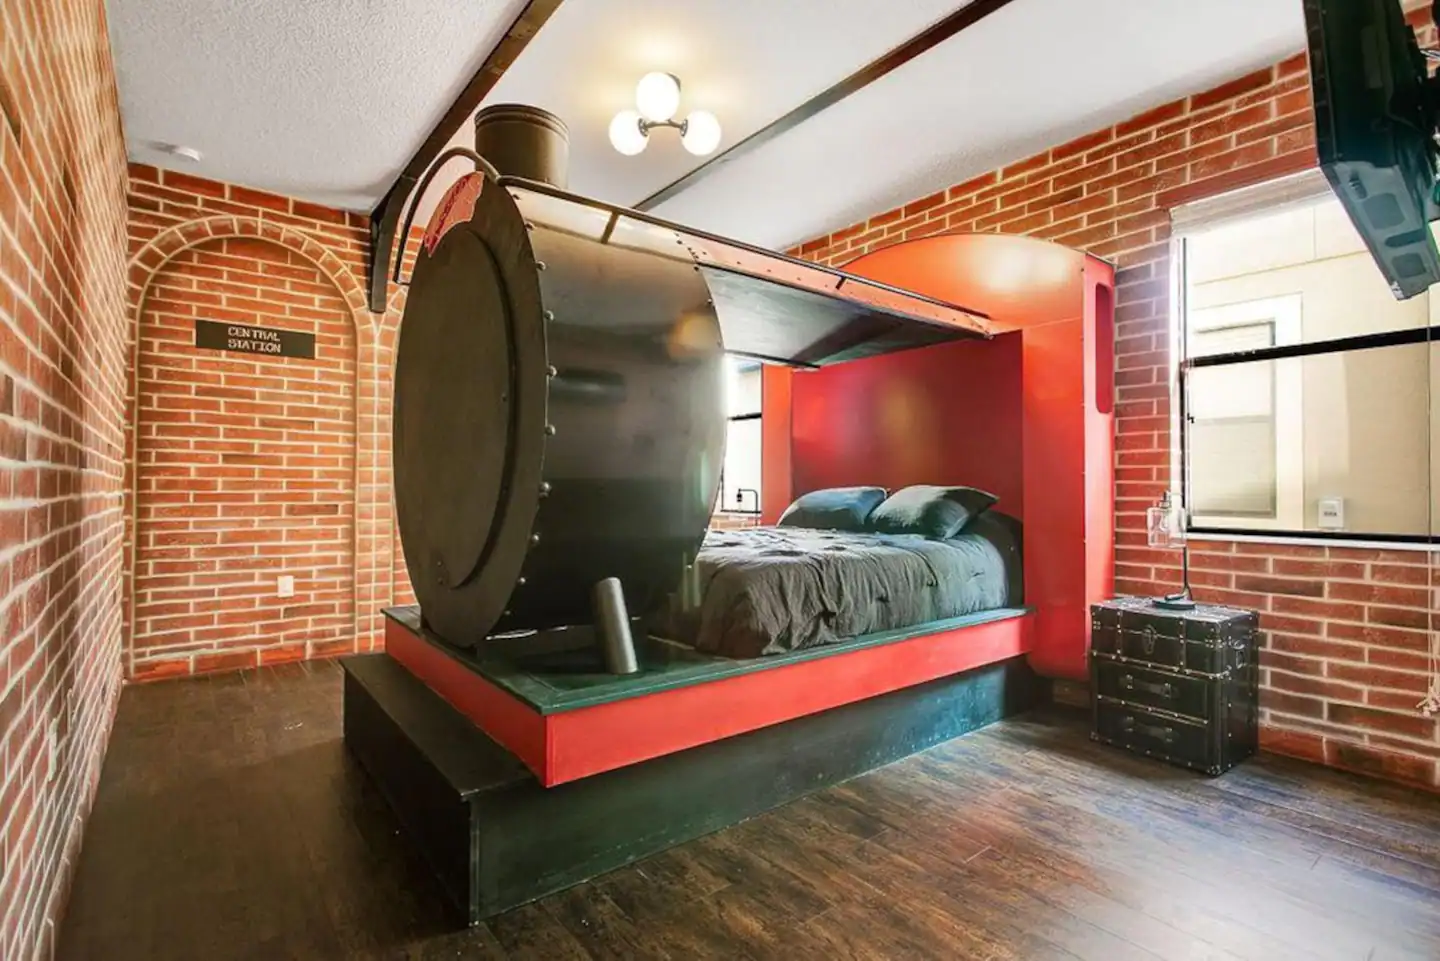 Wizards Way by Loma Homes, one of the best Harry Potter Themed Airbnbs